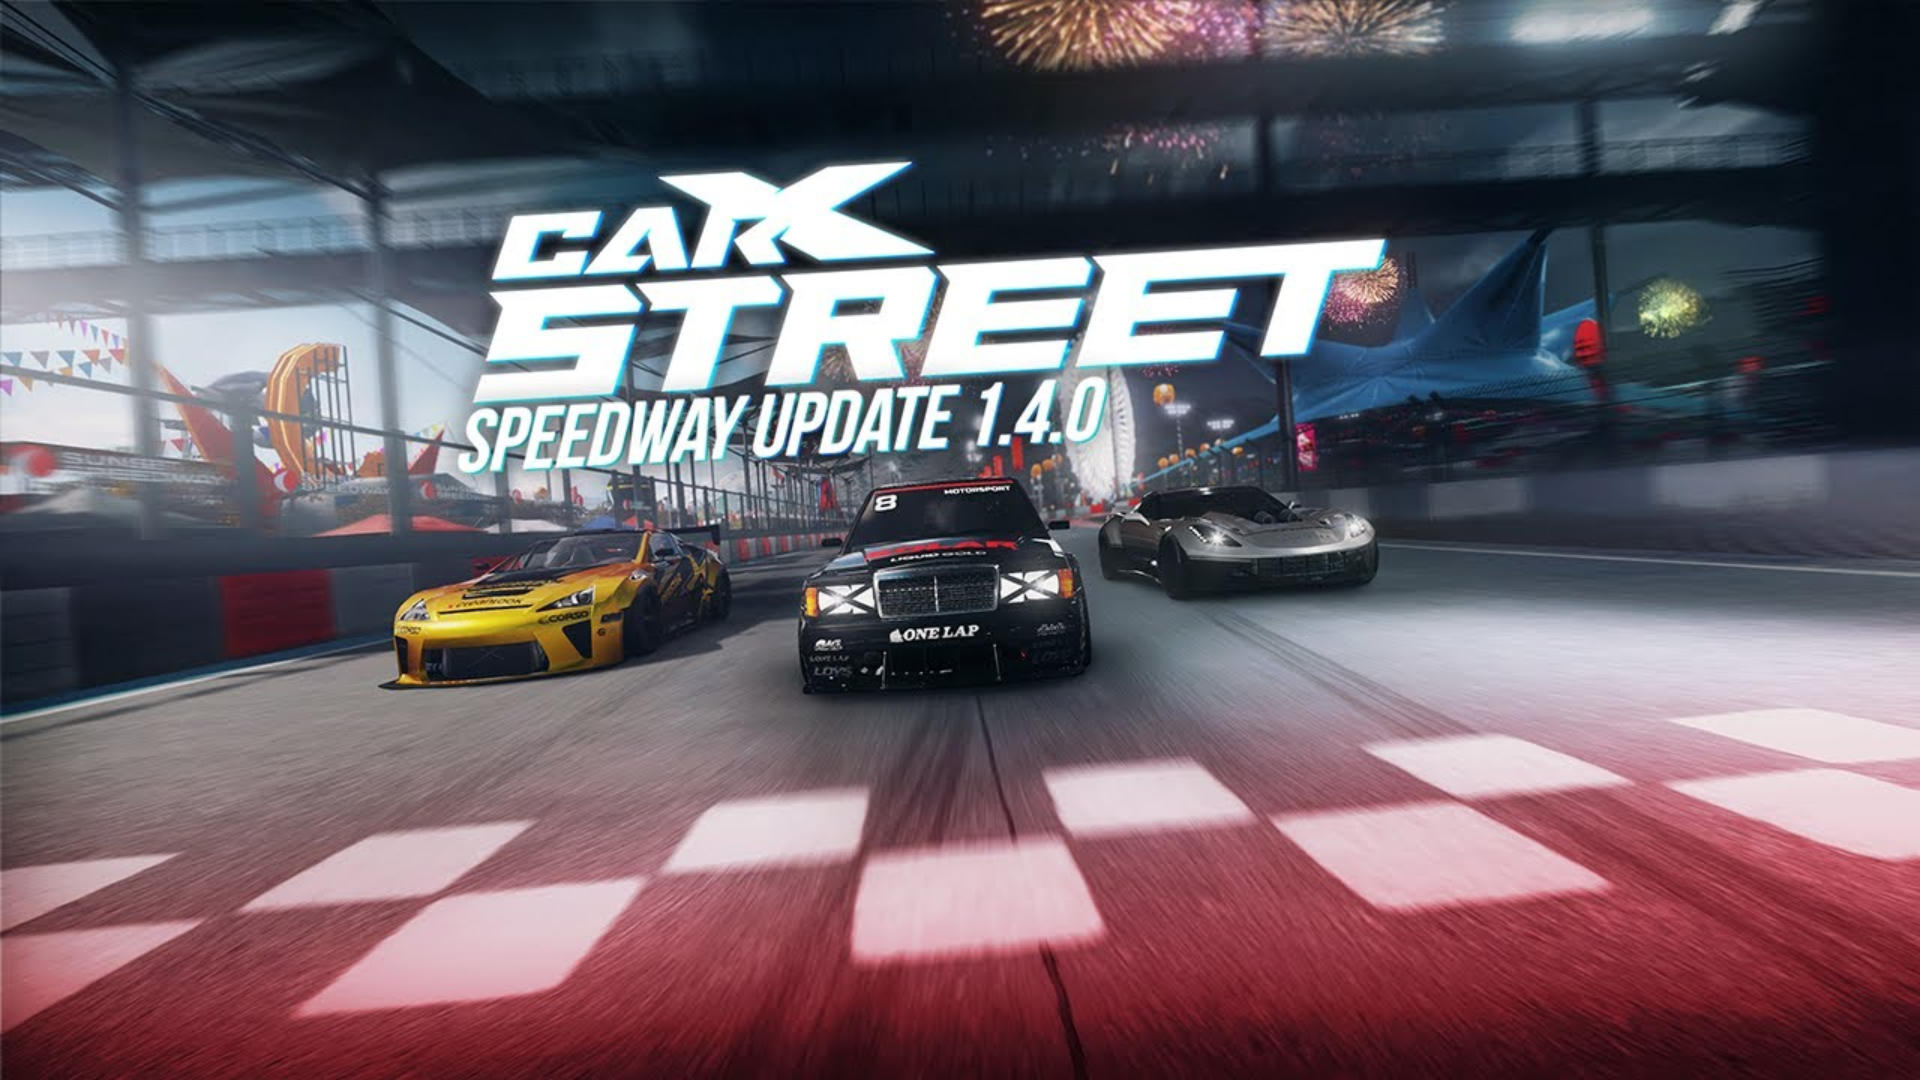 Featuring new Sunset Speedway location! CarX Street v1.4.0 update is live, download now!